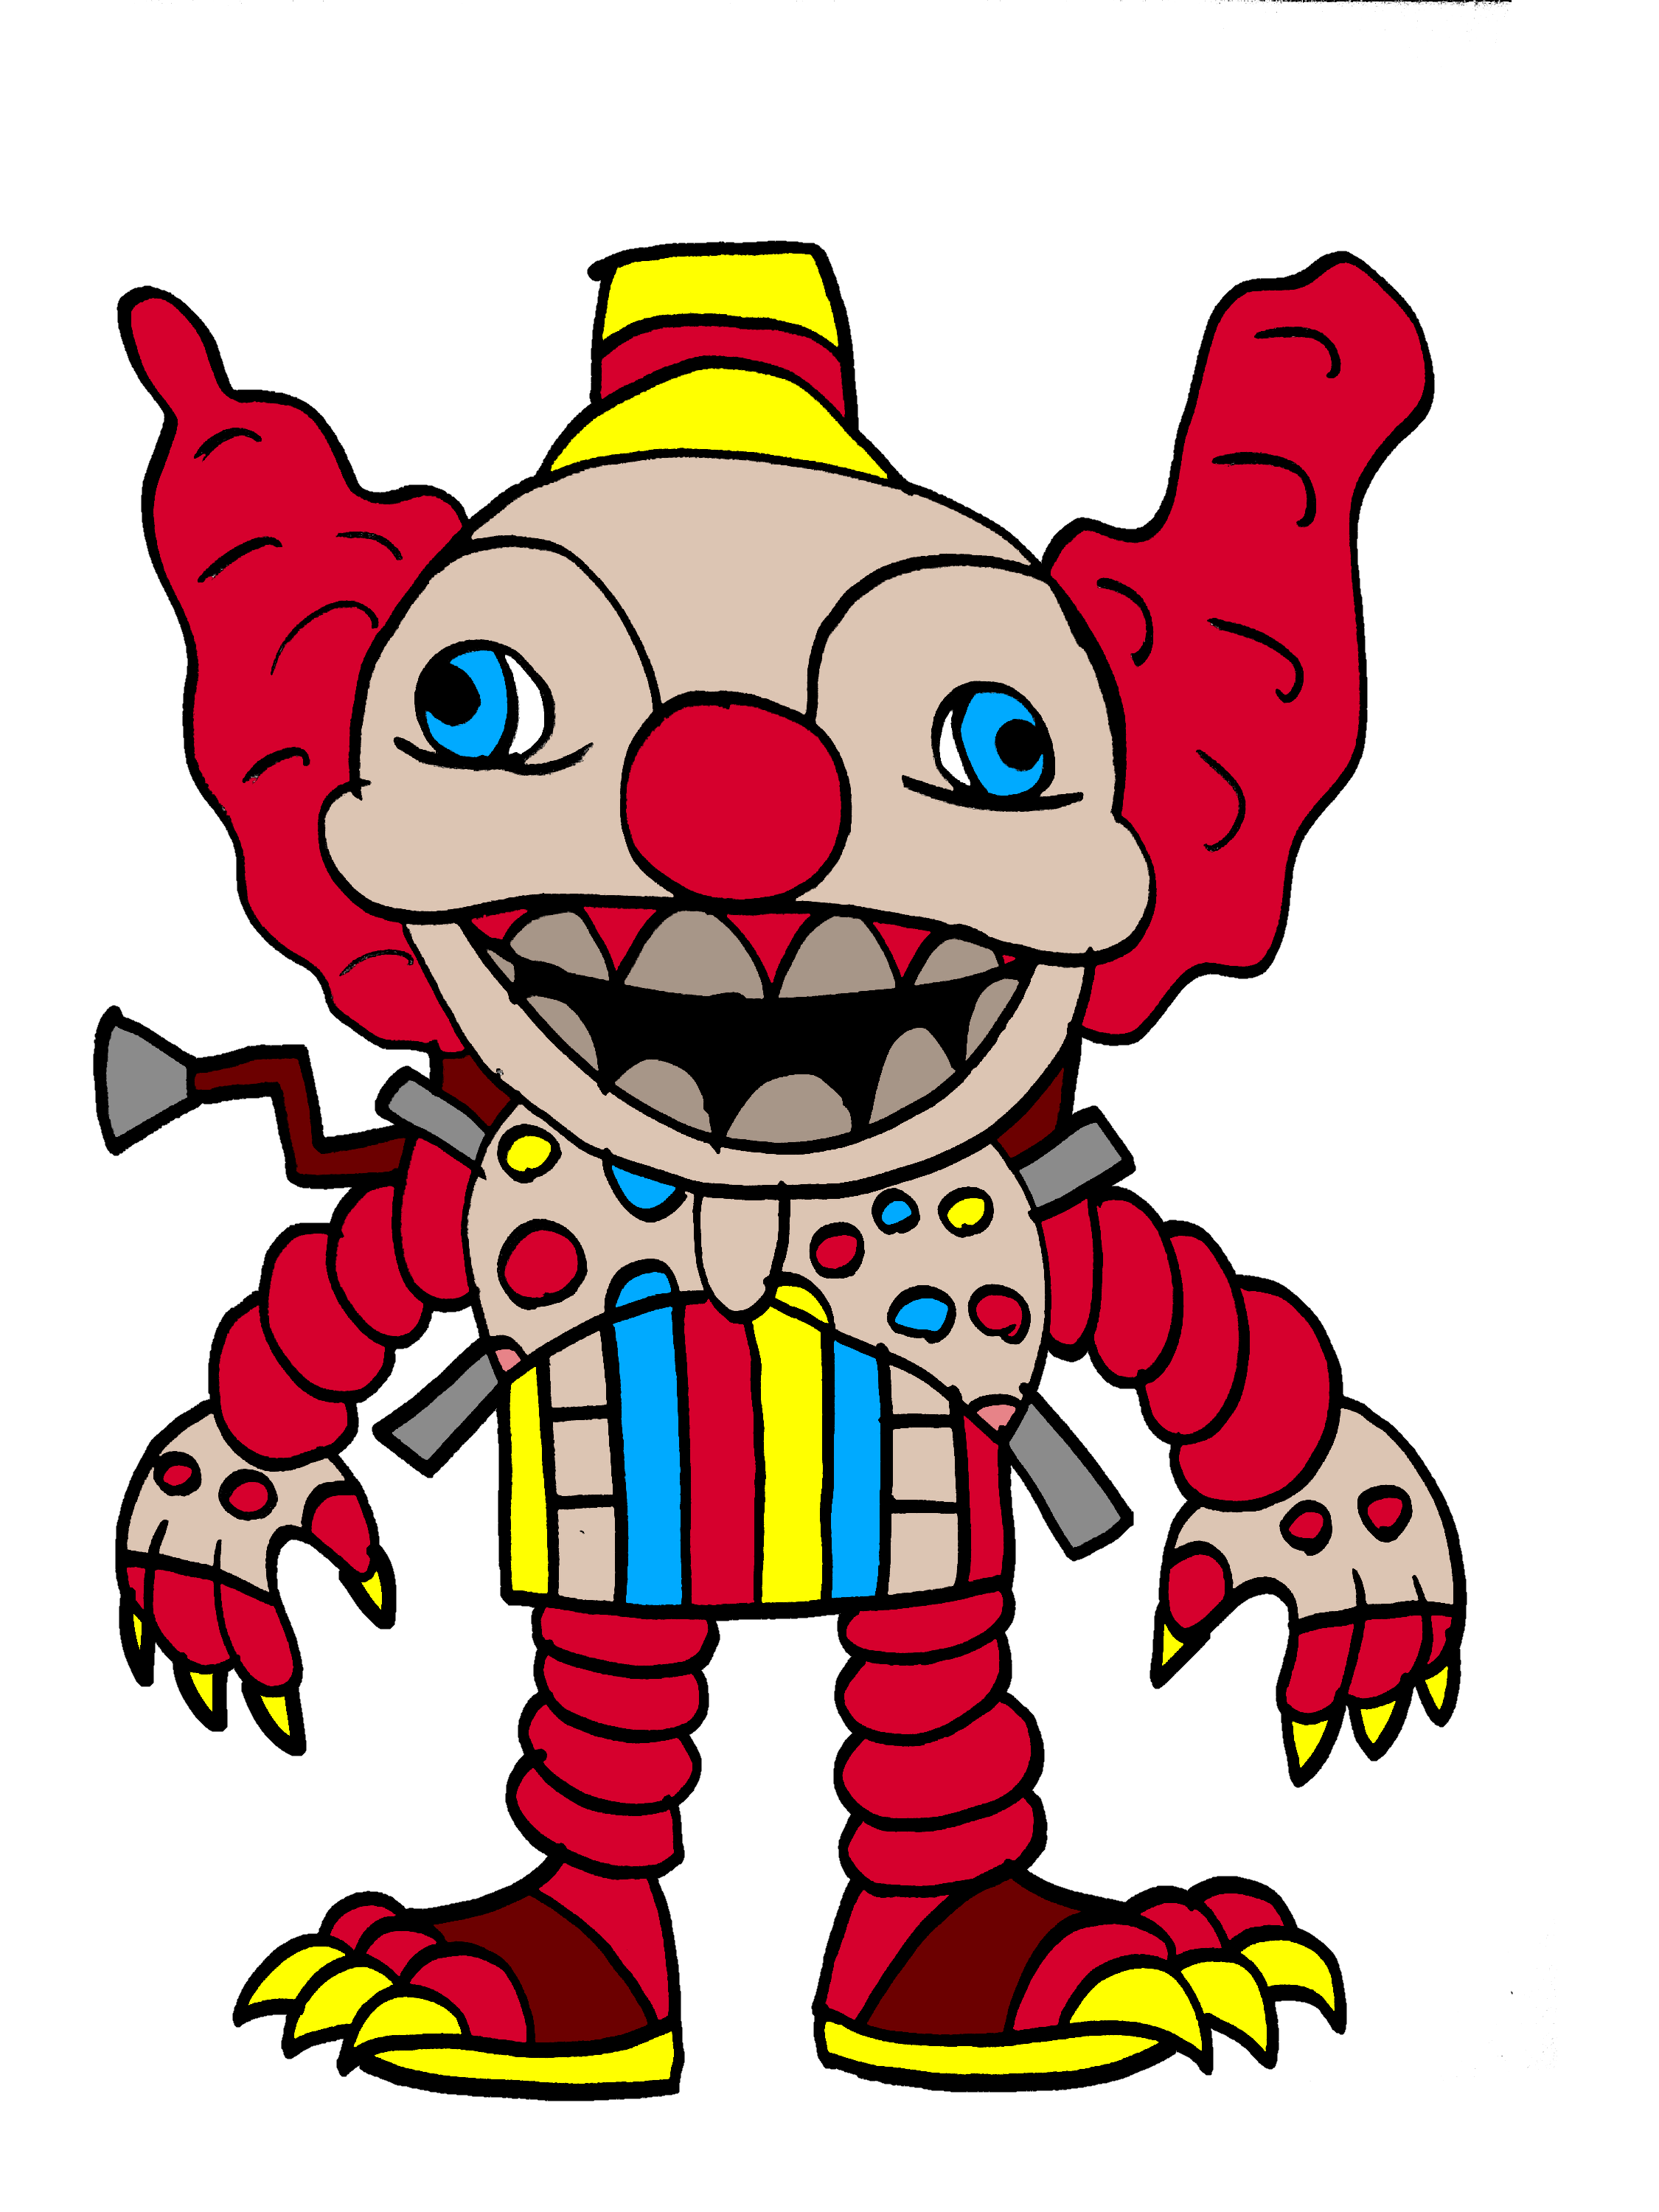 Project Playtime  Boxy Clown - Download Free 3D model by Xoffly (@Xoffly)  [b81947b]